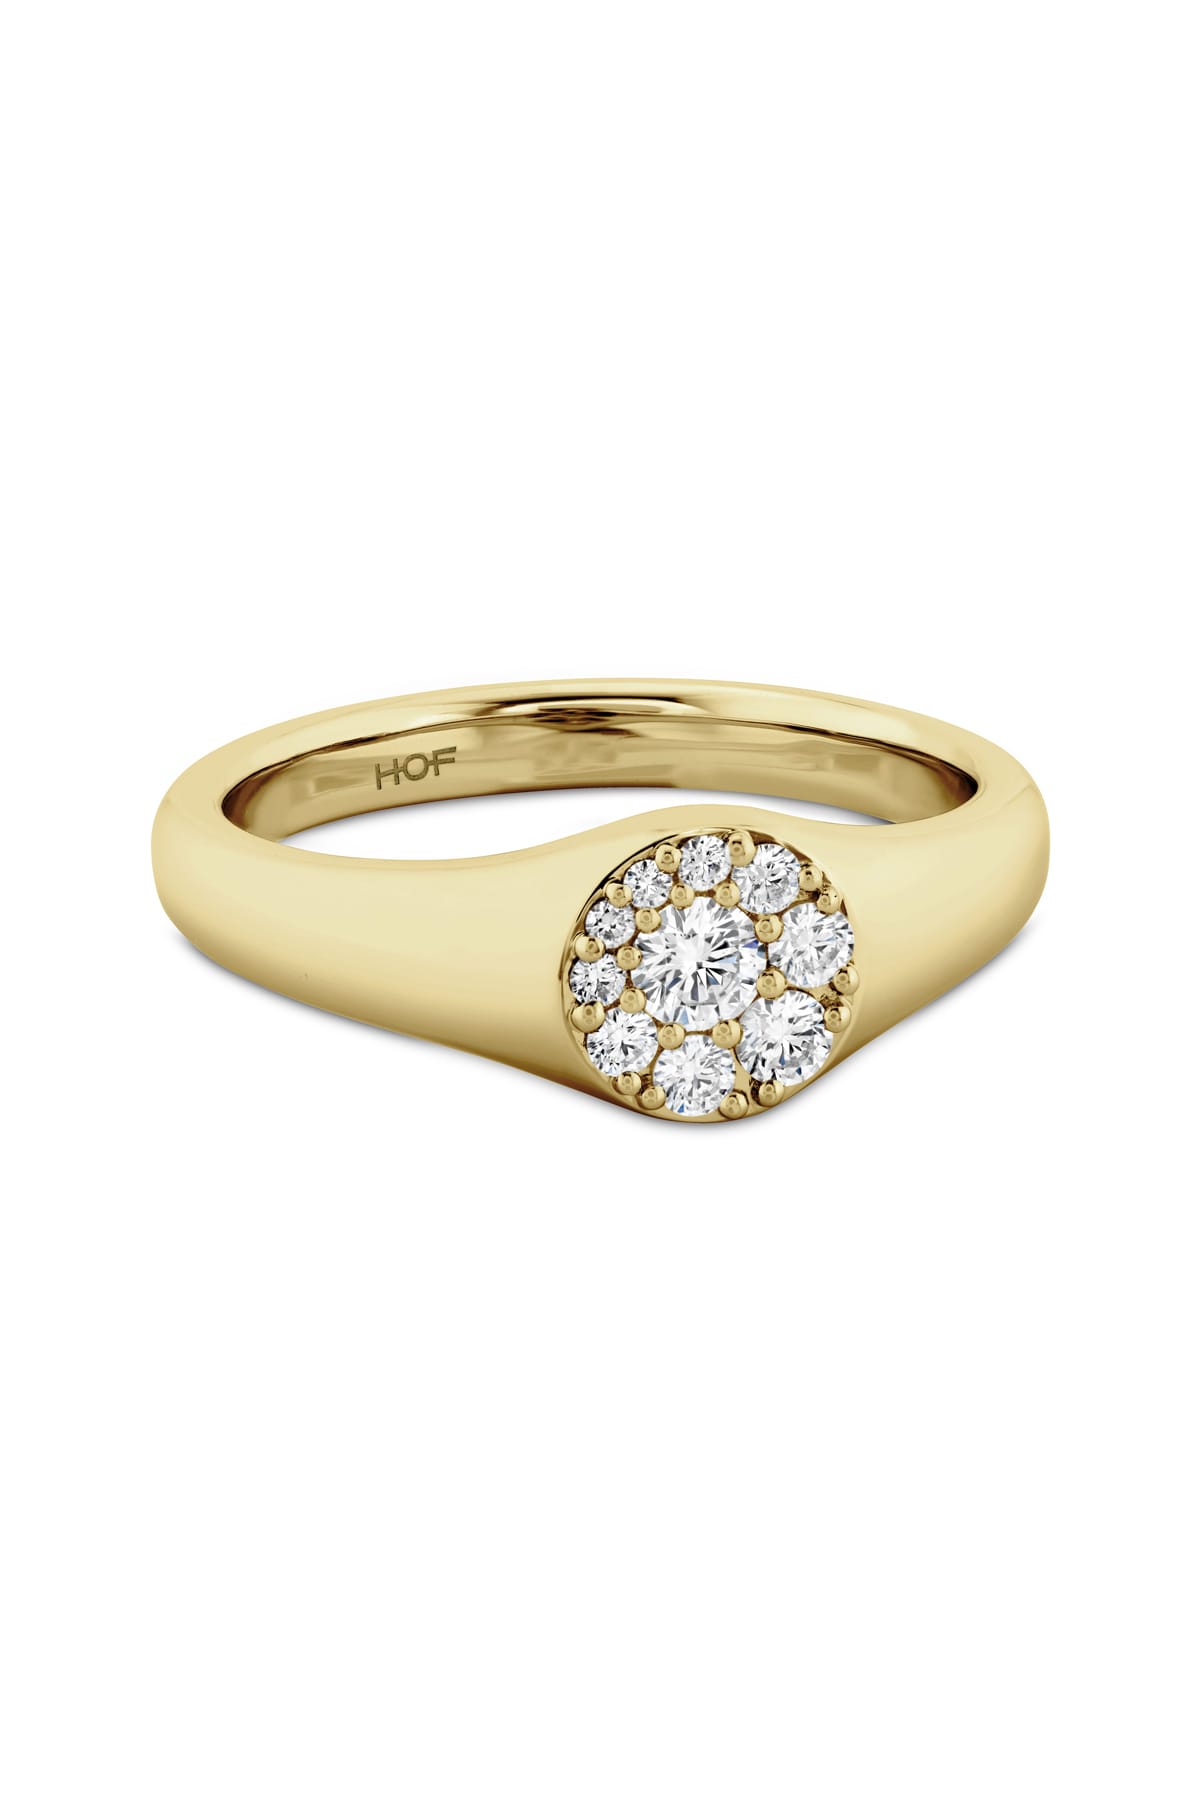 Tessa Circle Signet Ring From Hearts On Fire available at LeGassick Diamonds and Jewellery Gold Coast, Australia.